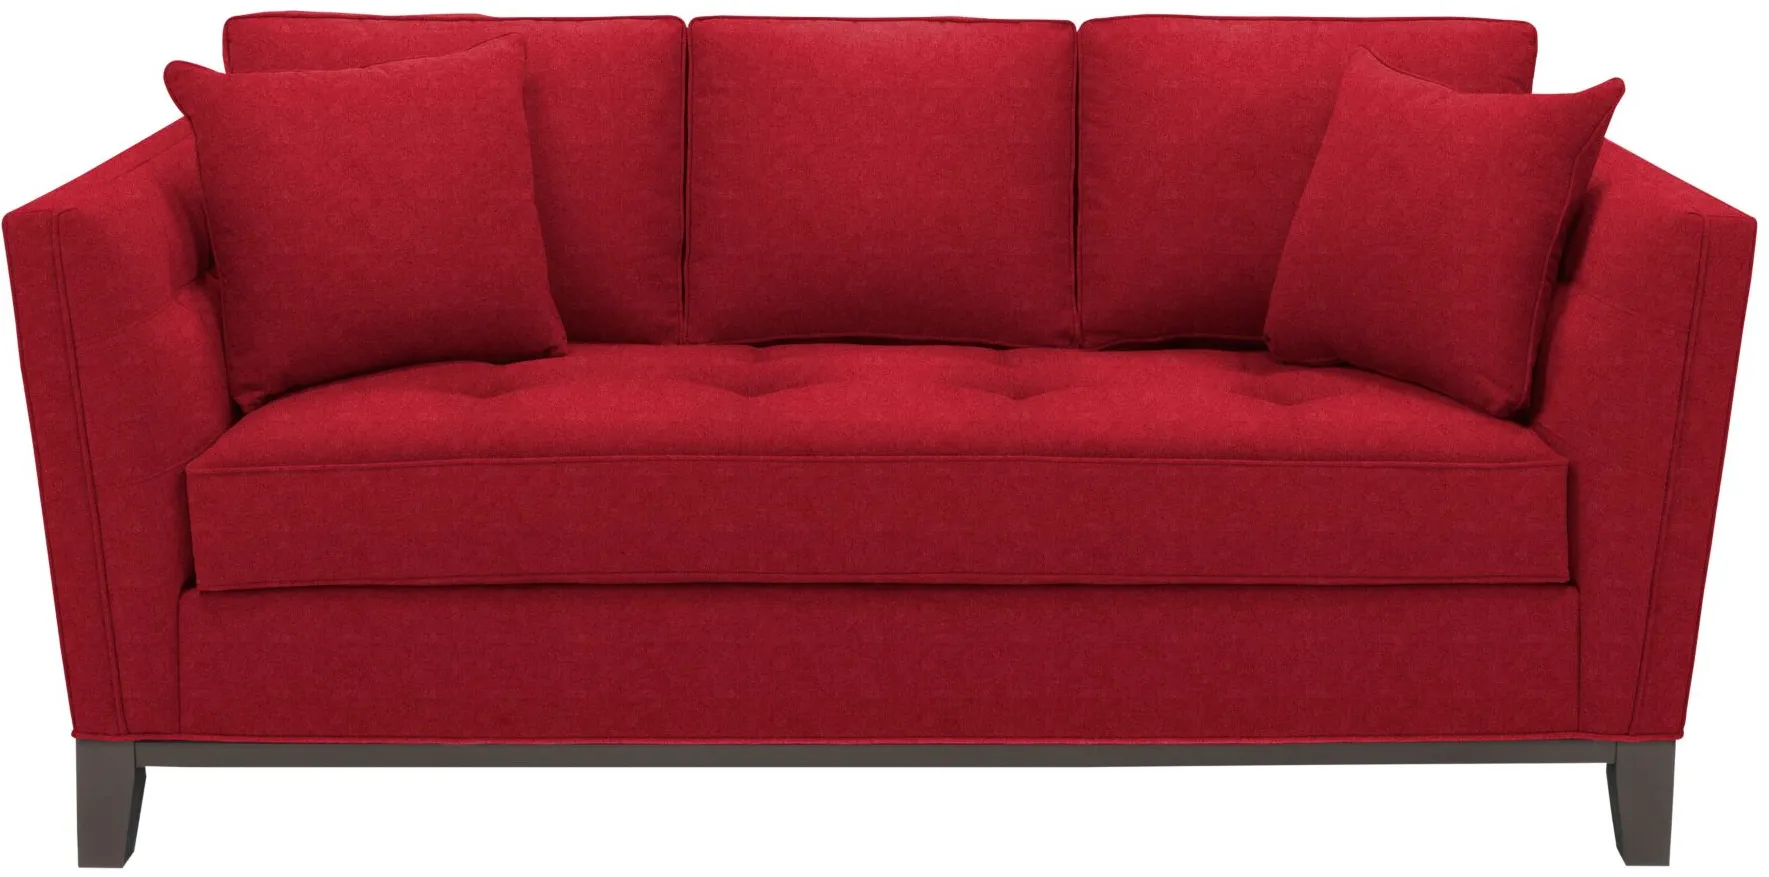 Macauley Apartment Sofa in Suede So Soft Cardinal by H.M. Richards